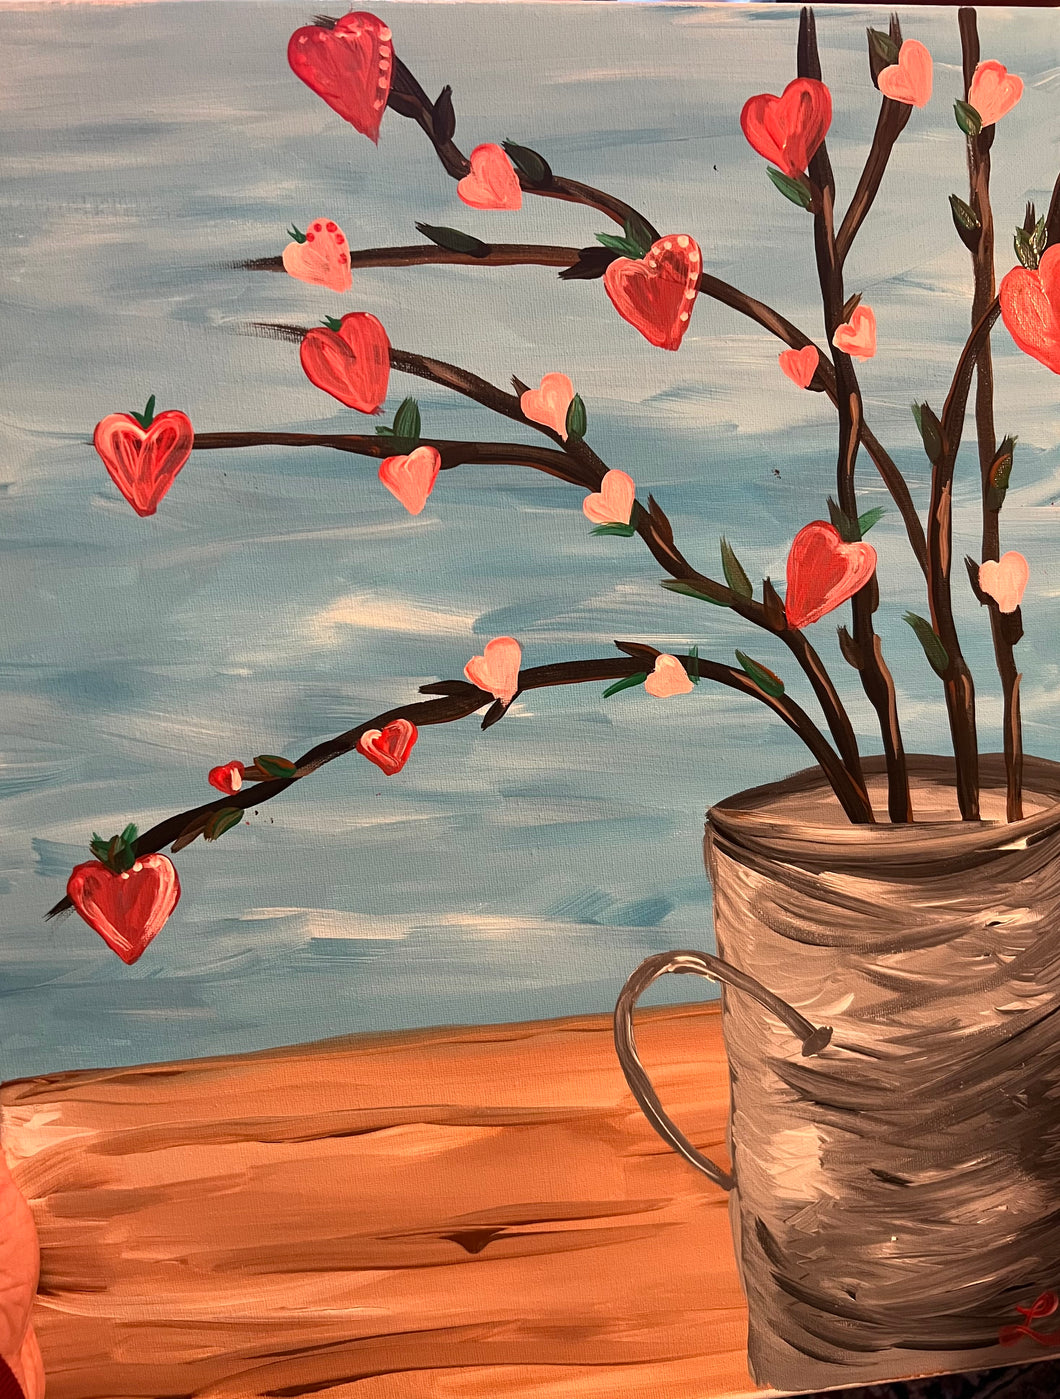 Sold out 02/10/2023 Galantine's Paint Night and Sangria..Ladies Night Out 6:00pm